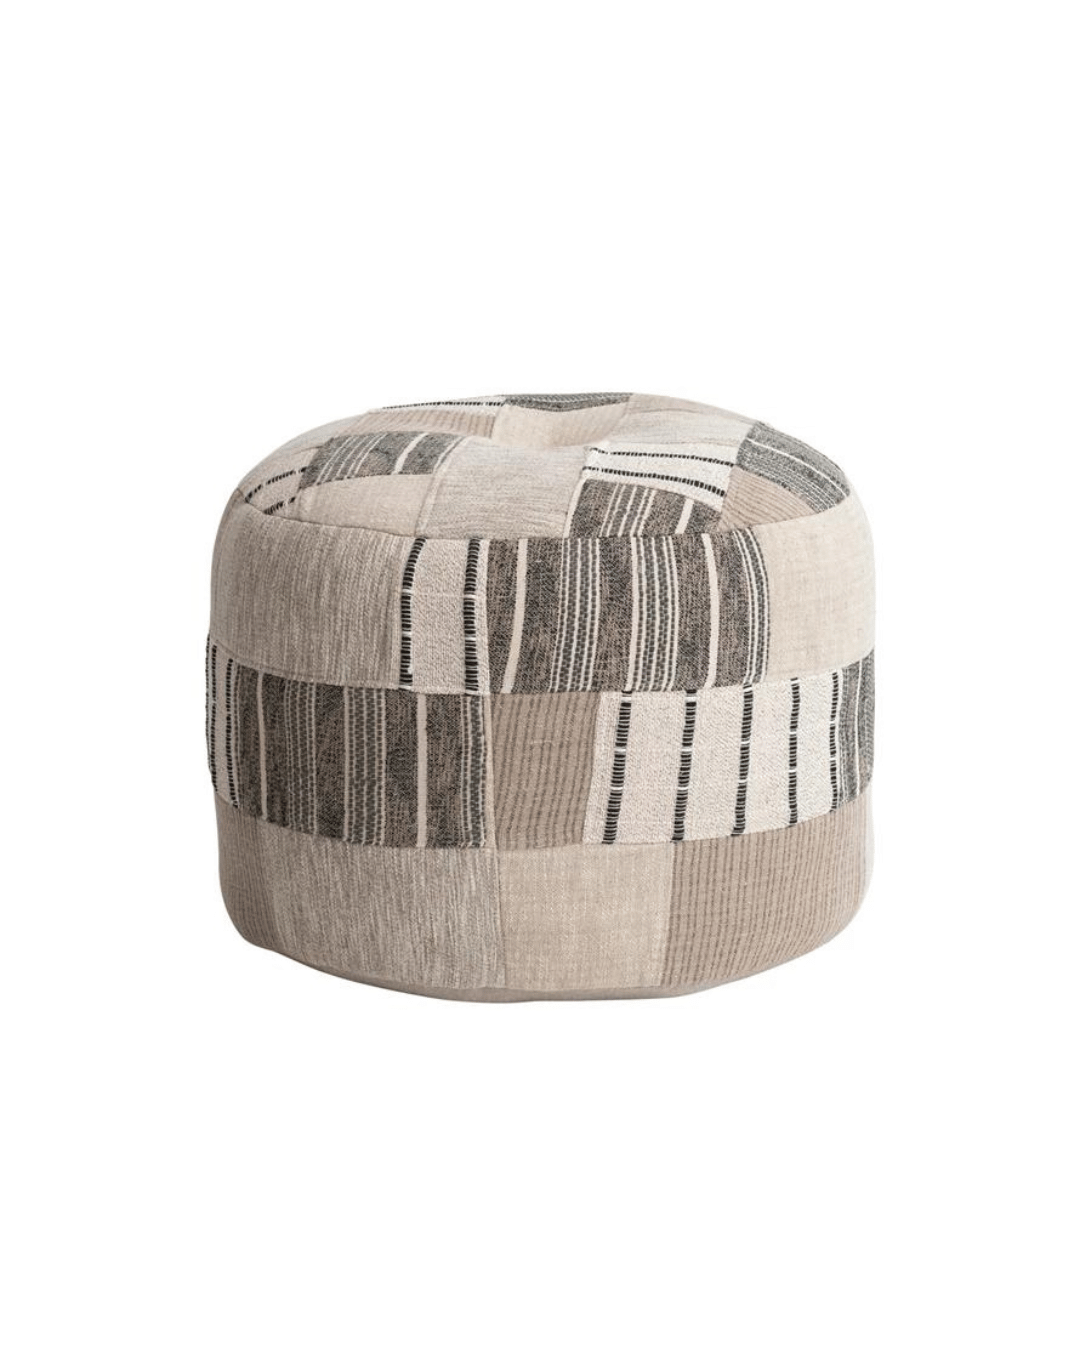 A round beige Slub Patchwork Pouf, Neutral 24" Round x 18"H by Creative Co-op with a patchwork design, featuring various geometric patterns in black and white. This pouf exudes artisanal charm with its textured fabric and contemporary look, suitable for seating or as a decorative accent in a living space.